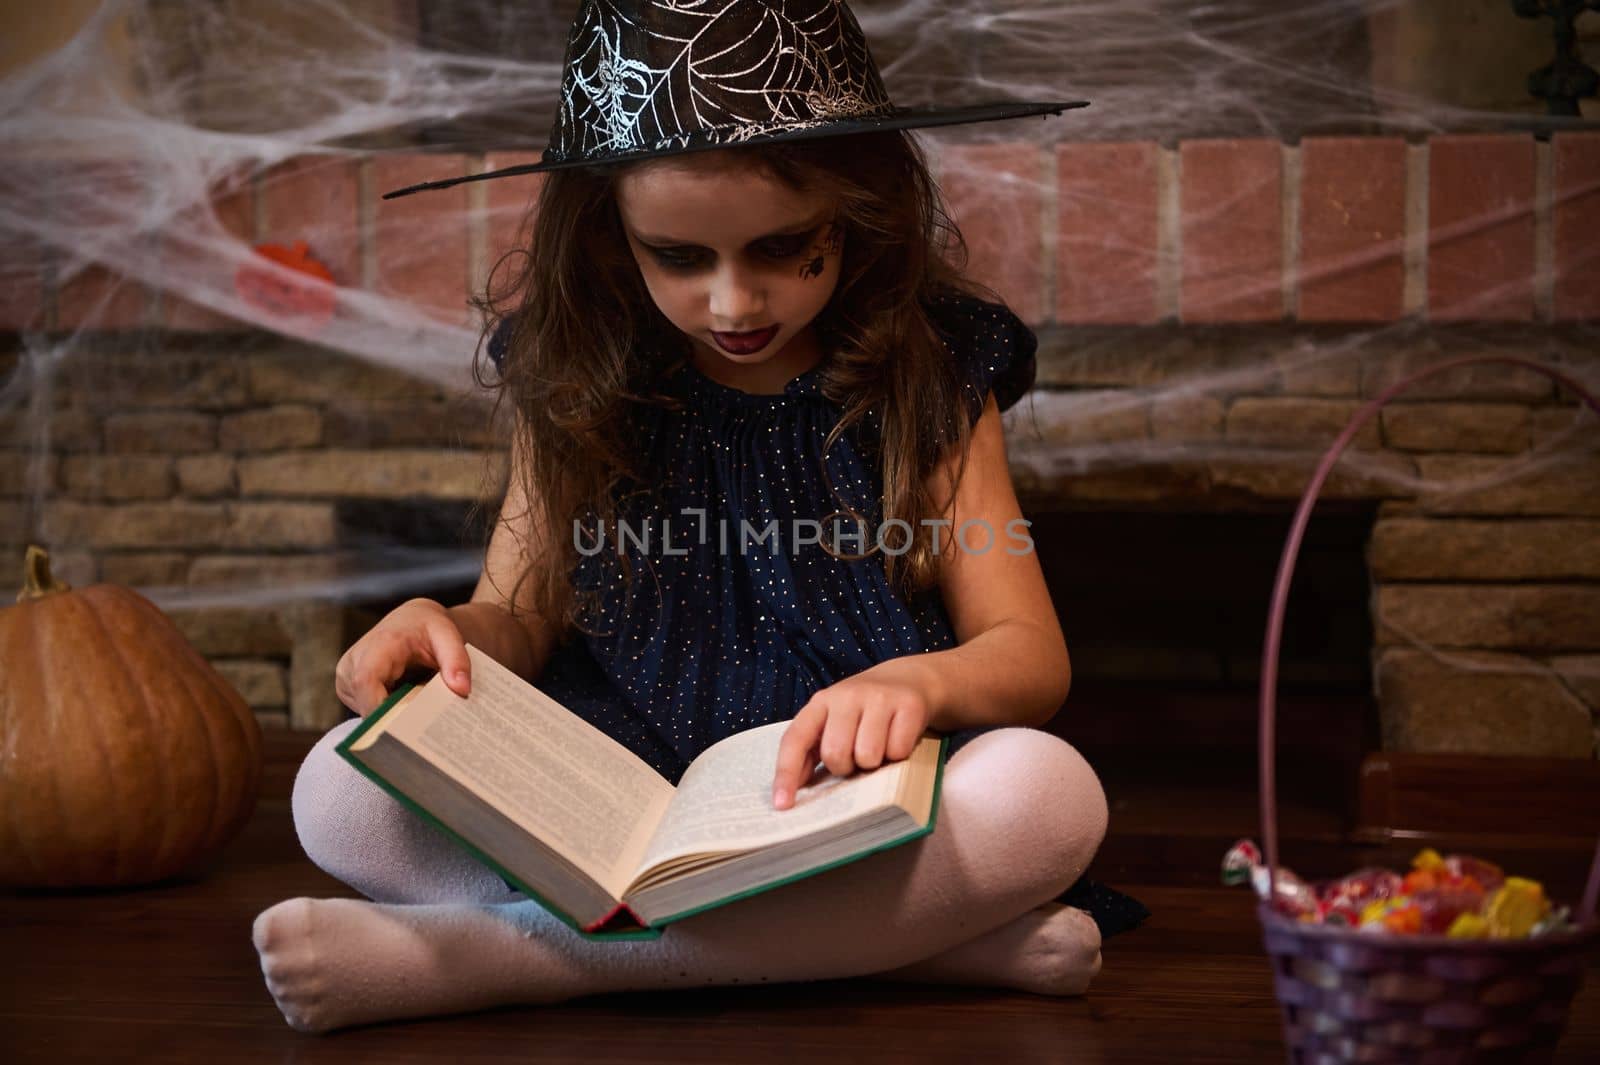 Little girl enchantress in wizard's hat, surrounded by Halloween treats casting spells while reading a sorcery book. by artgf